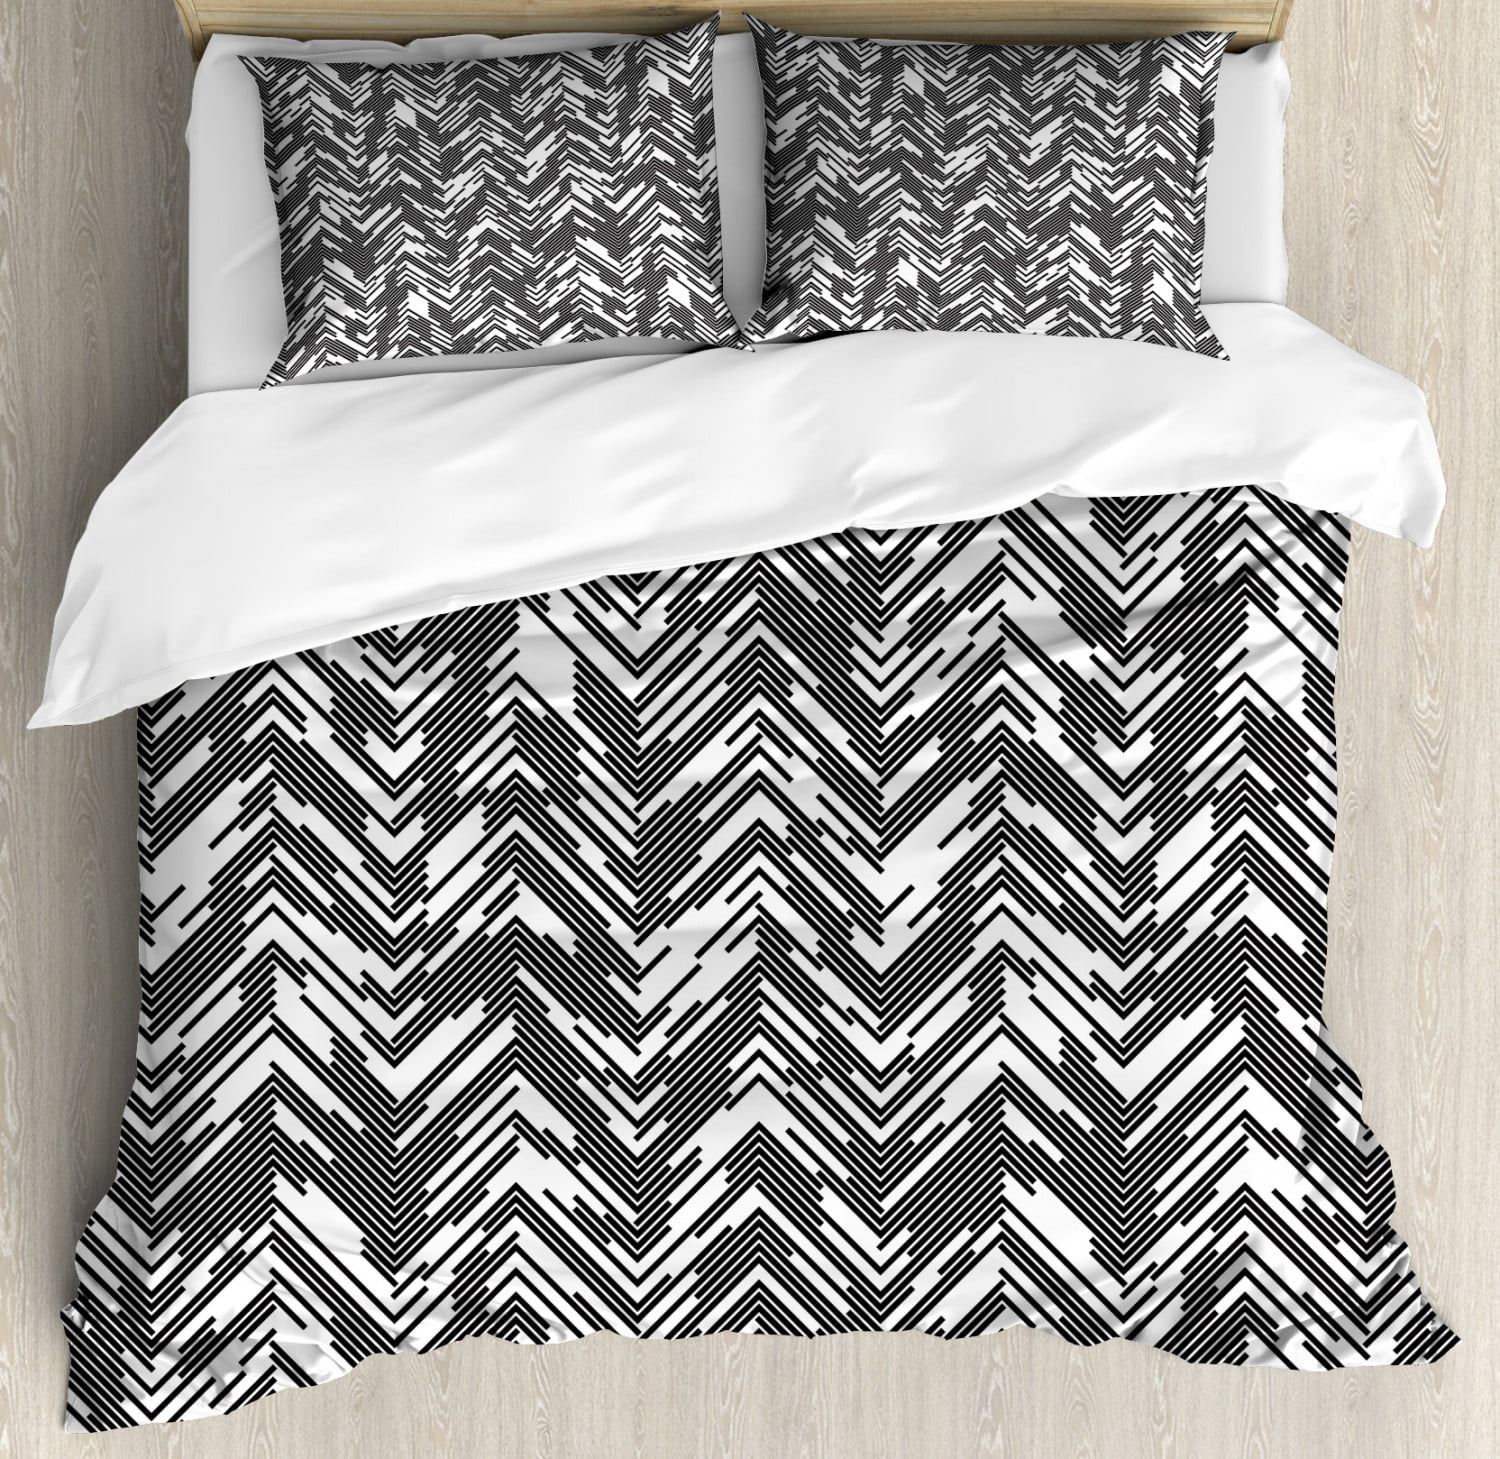 Black And White King Size Duvet Cover Set Artistic Chaotic